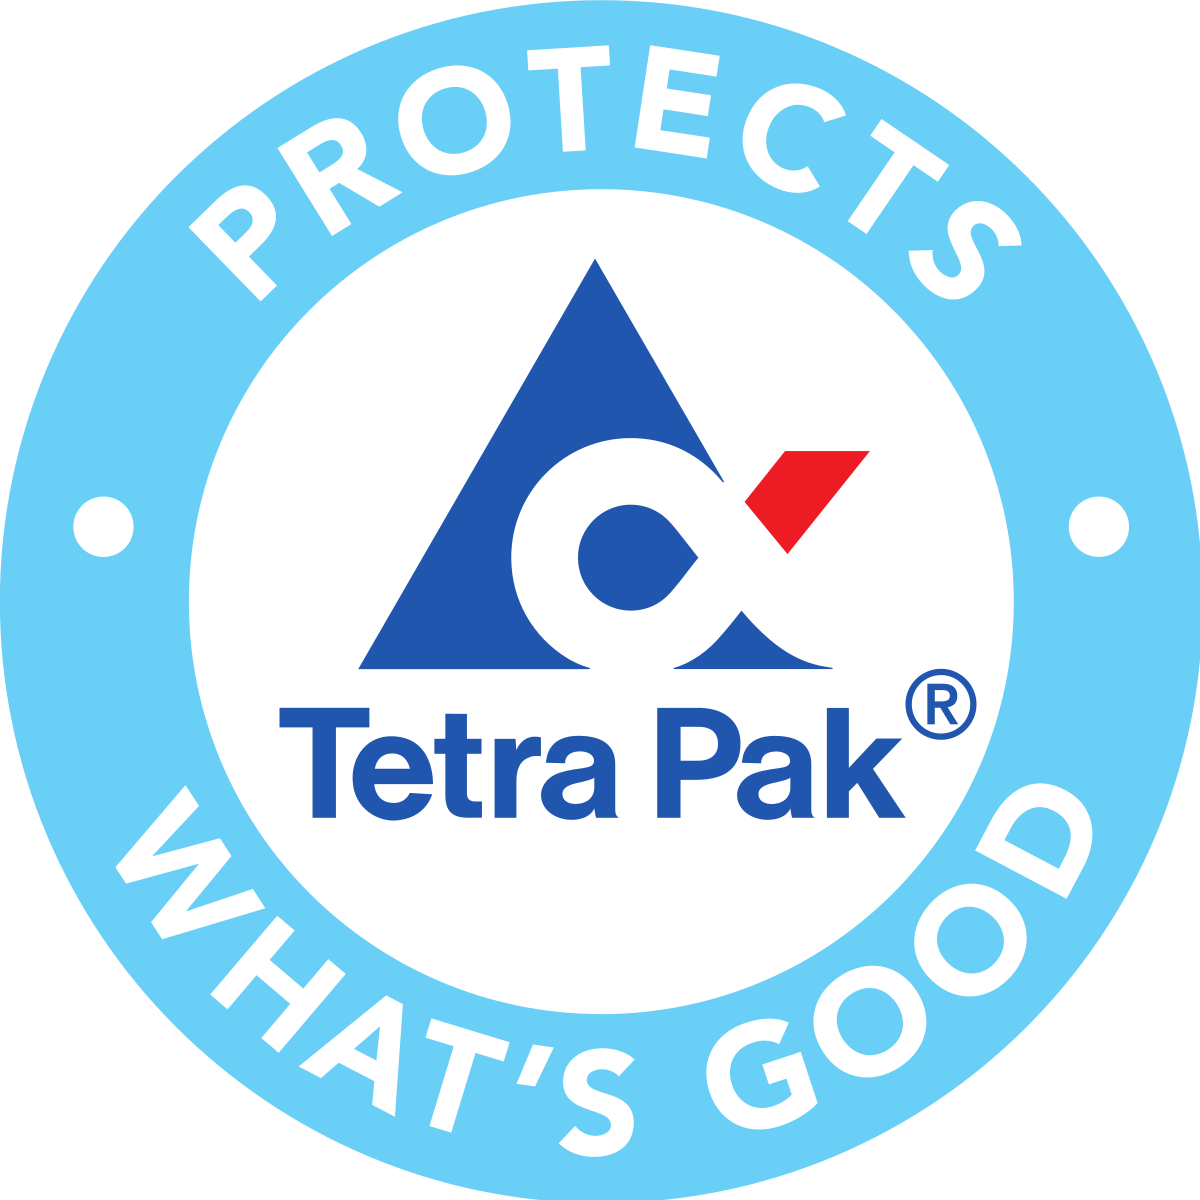 Tetra Pak - Automation Engineer - Functional Safety